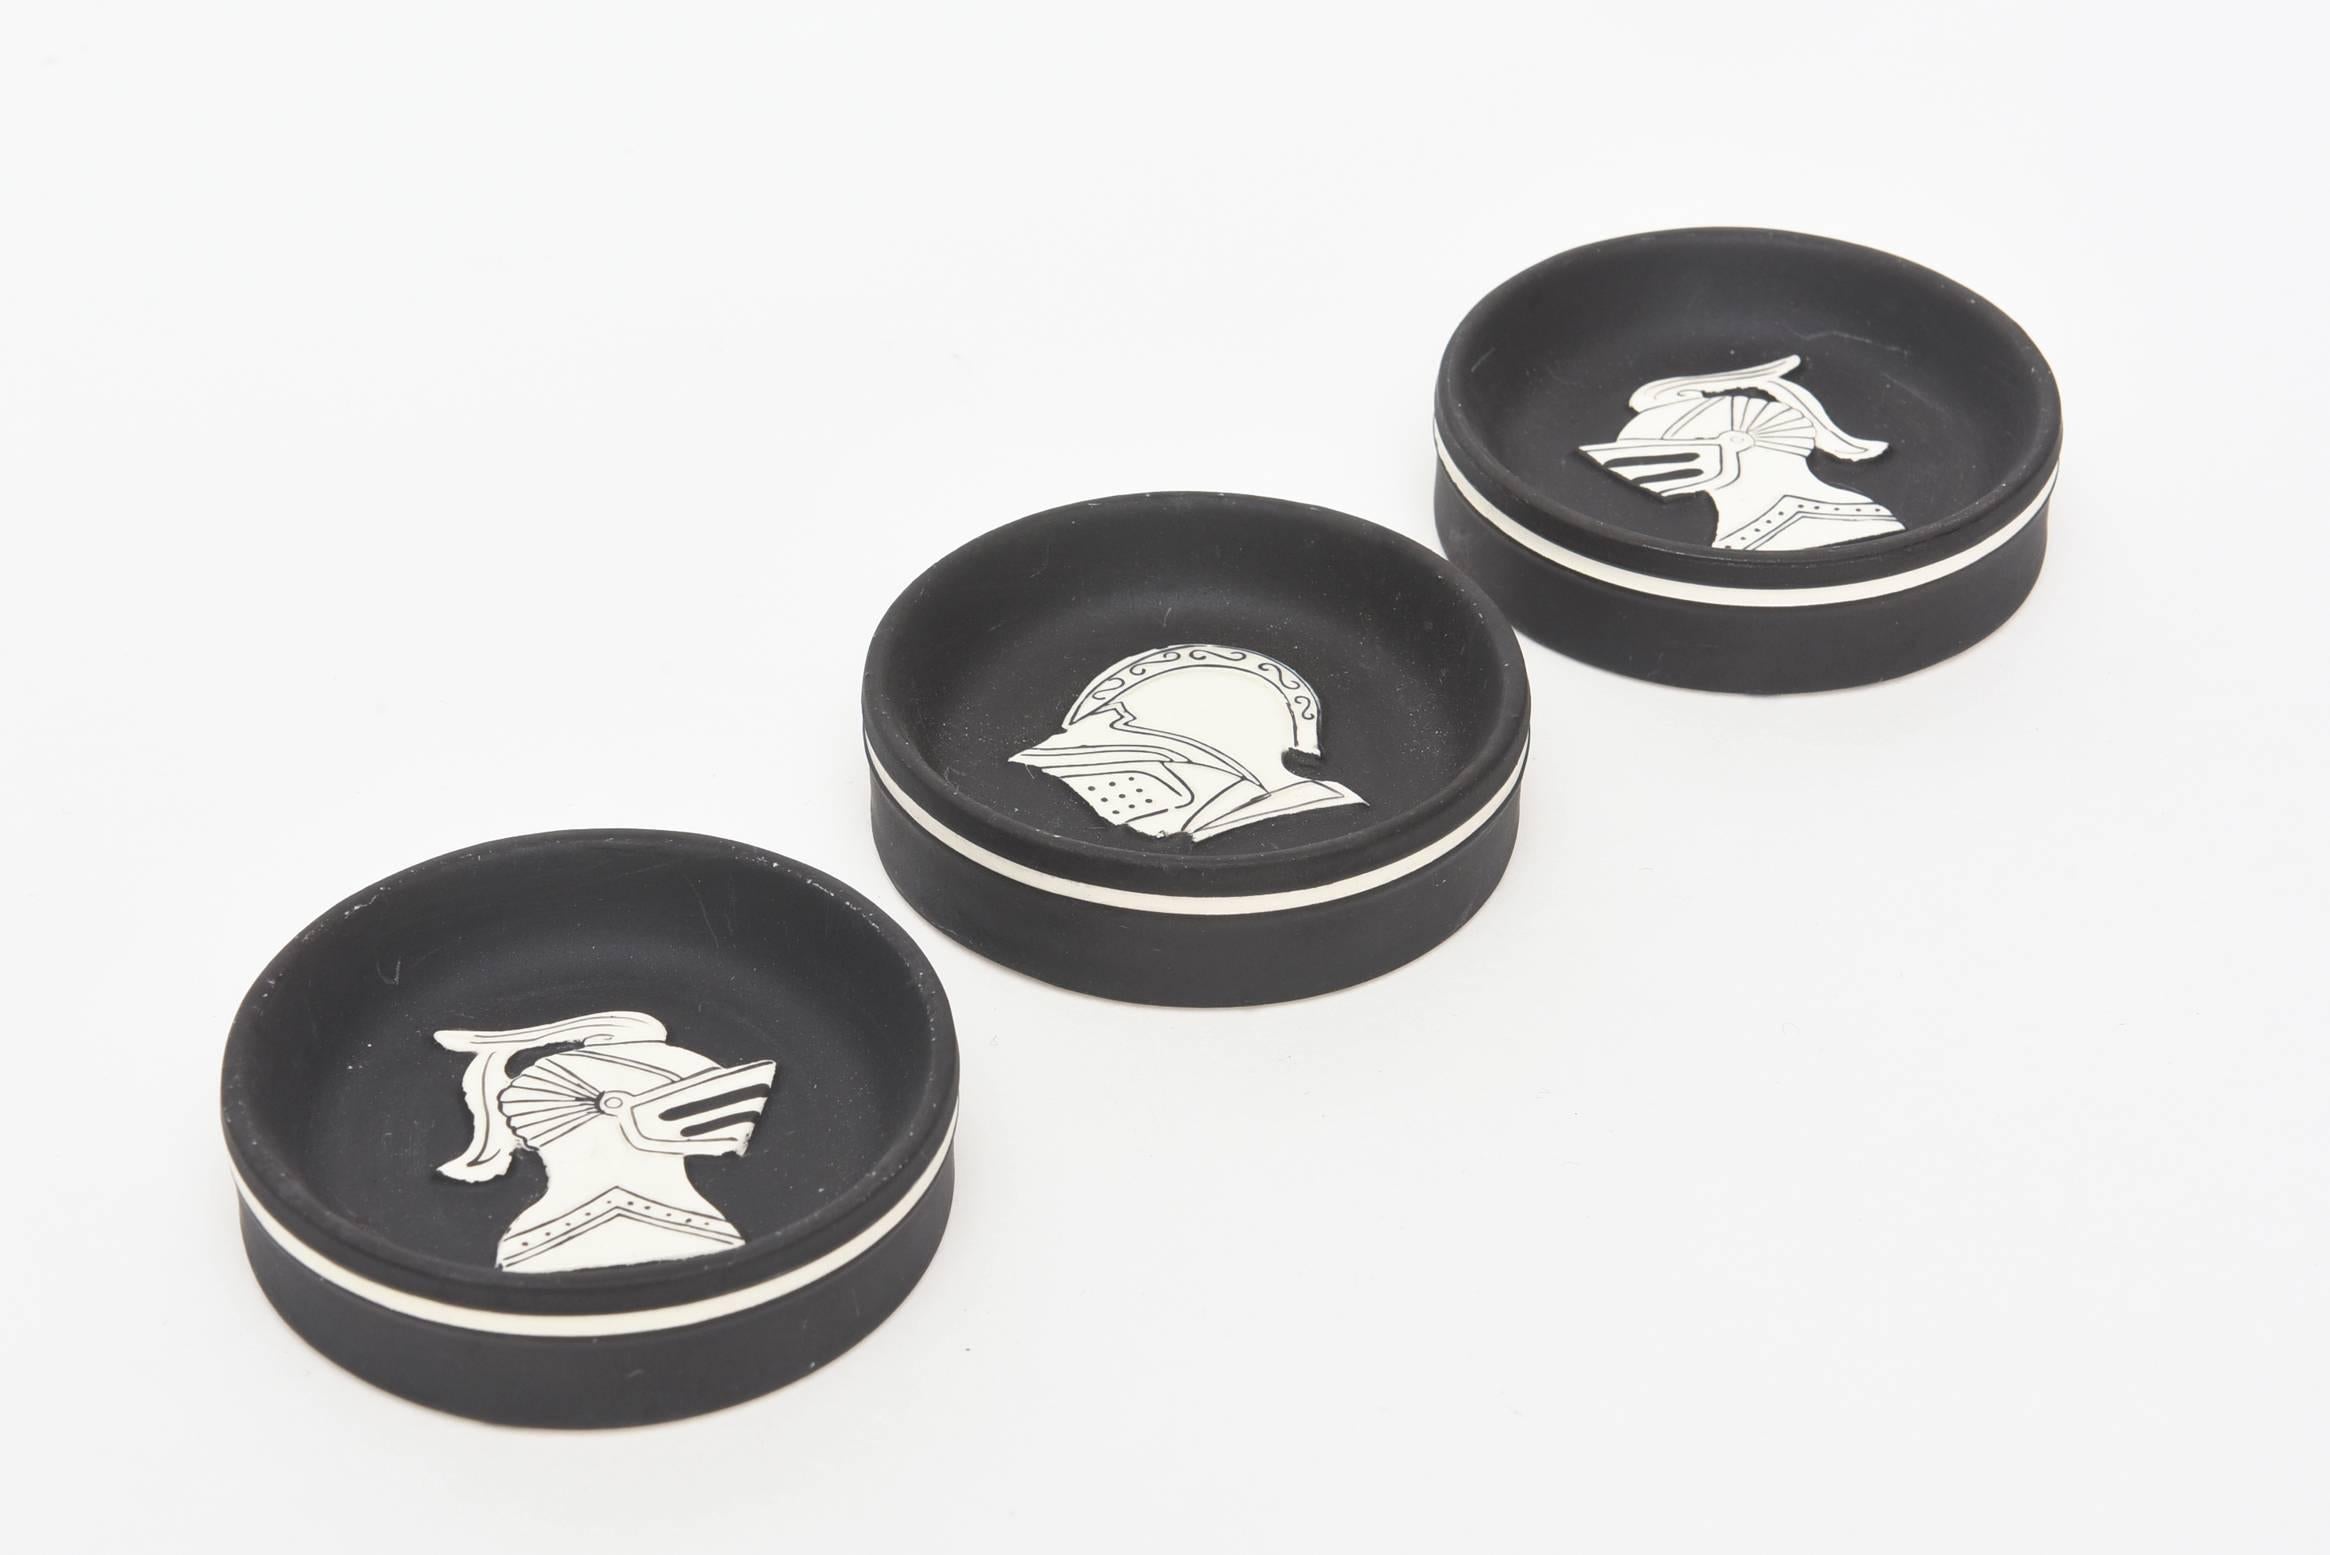 These graphic and interesting vintage German porcelain small dishes/objects are the subject matter of 3 different knights faces. The white porcelain face is raised with black drawings. The matt black porcelain bottom is outlined with white around